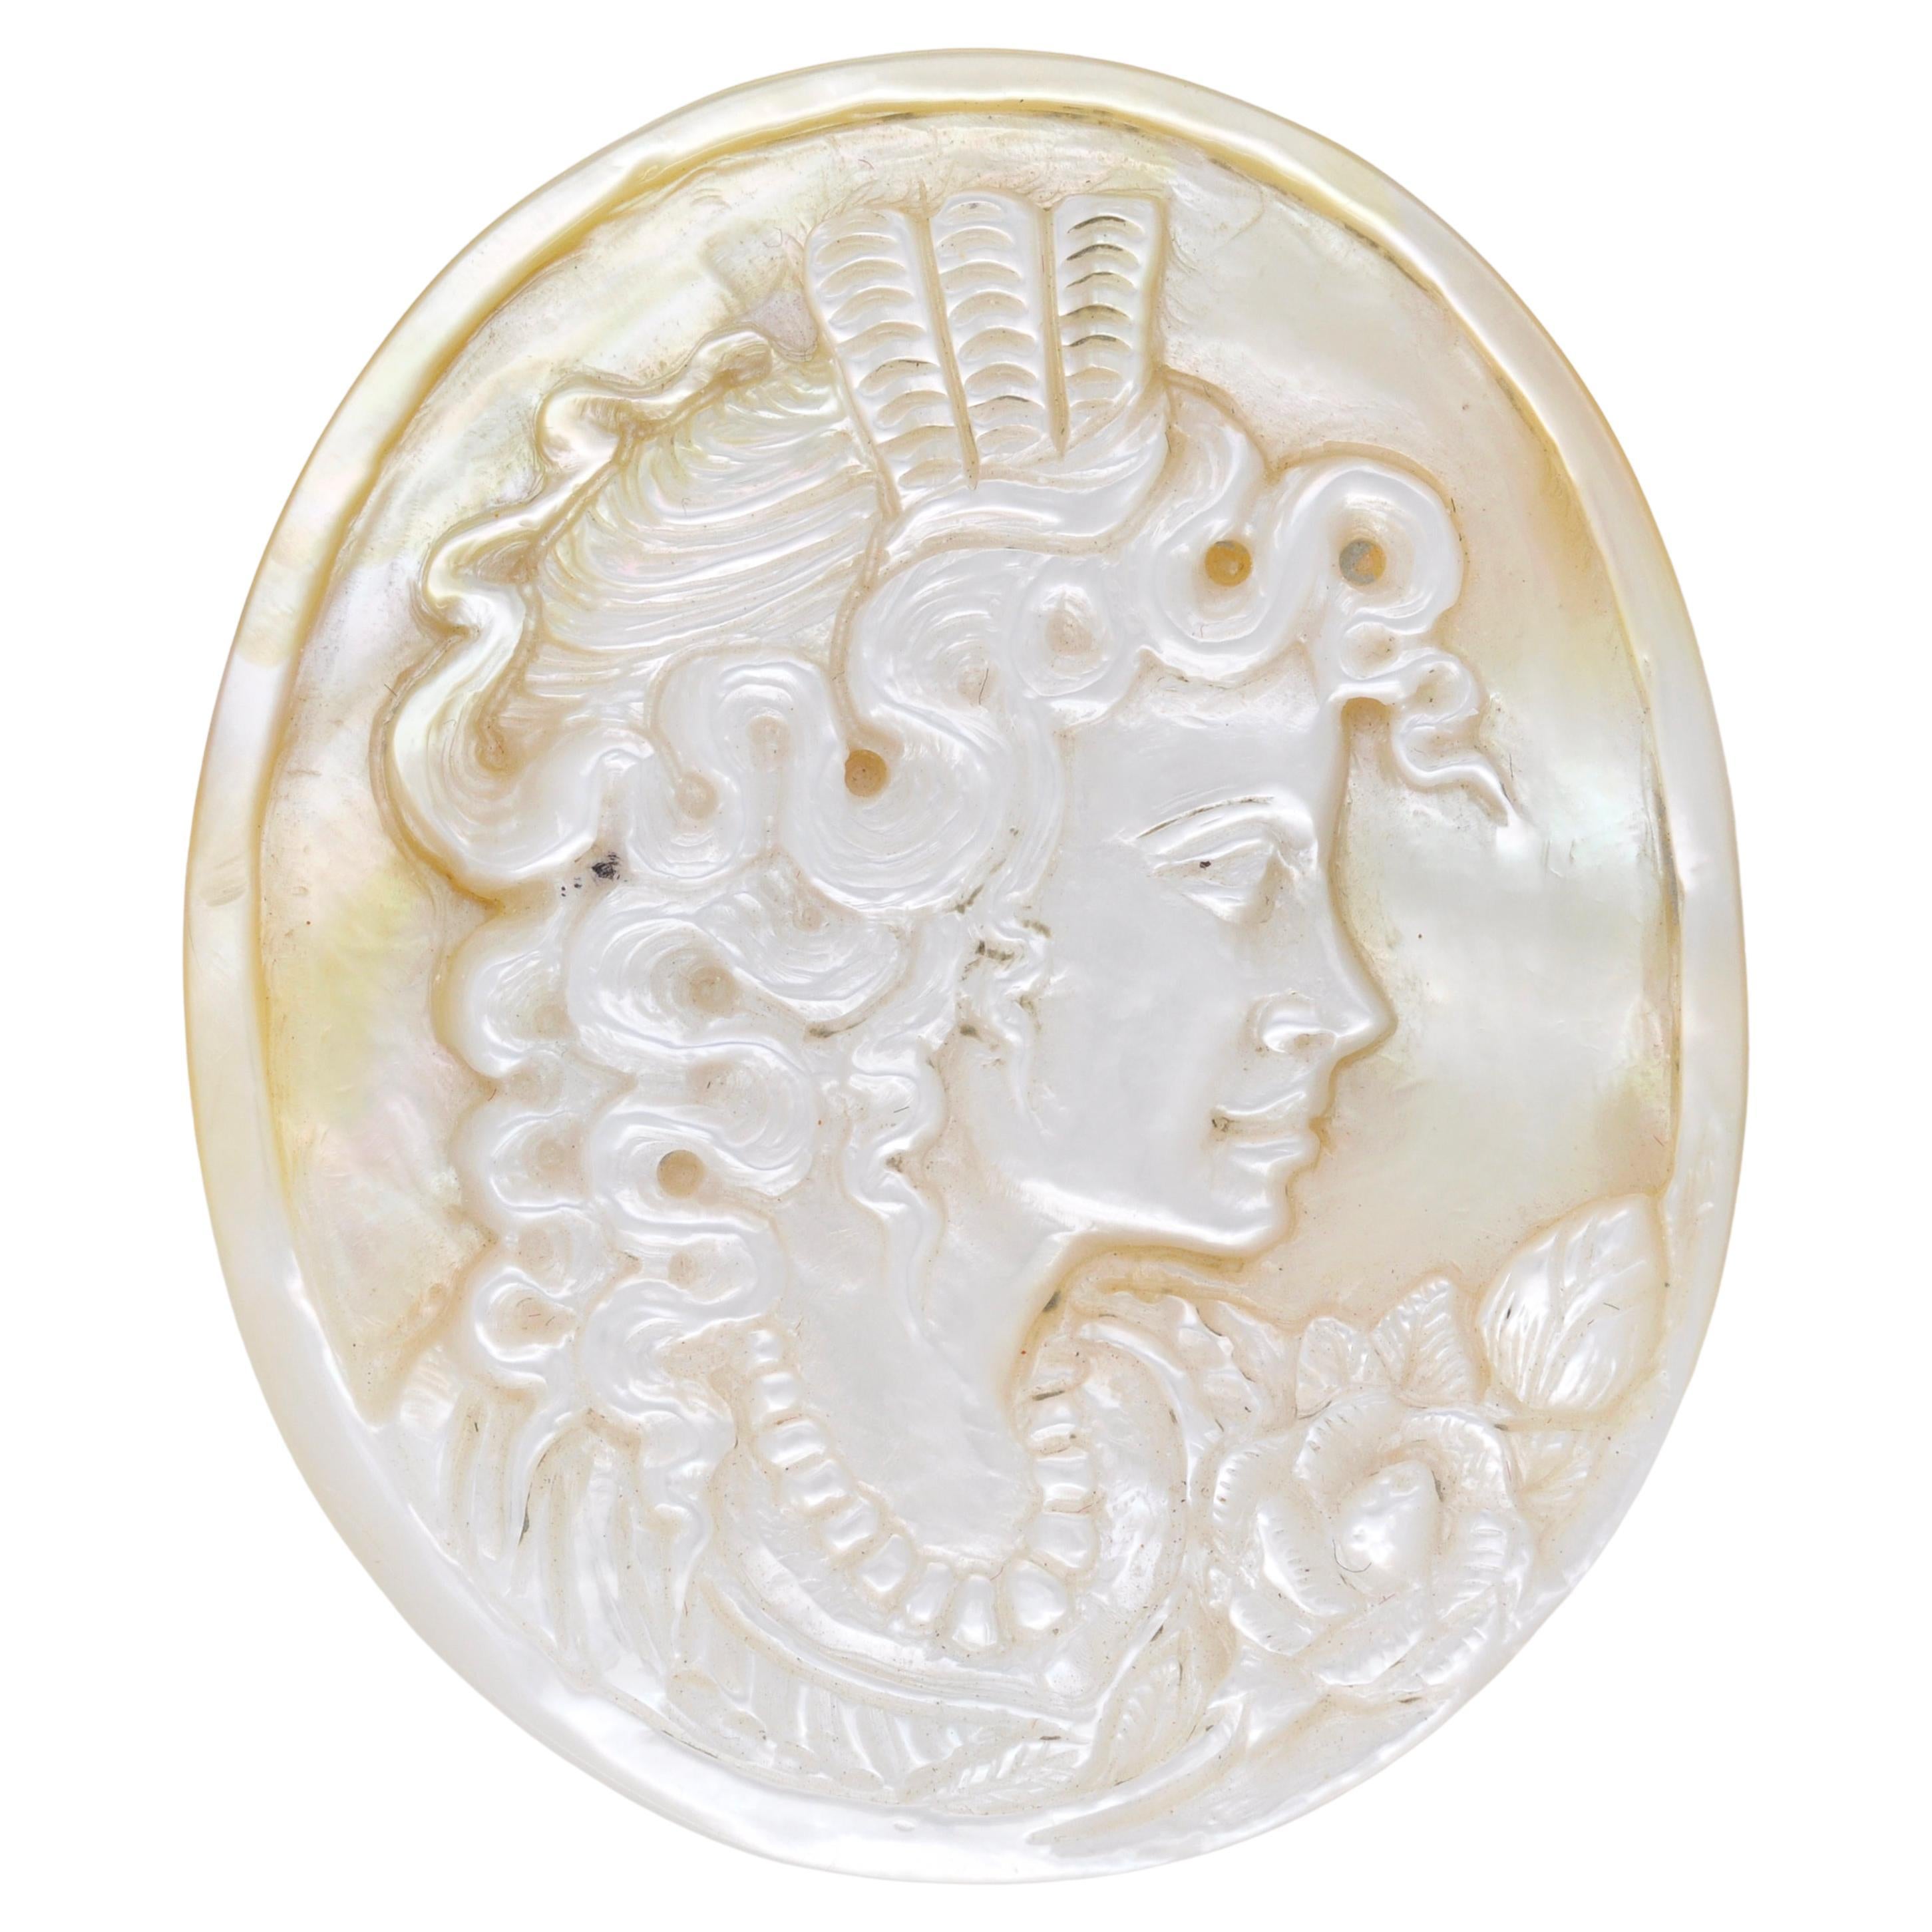 36.44 Carat Hand Carved Mother of Pearl Lady Cameo Carving Loose Gemstone For Sale